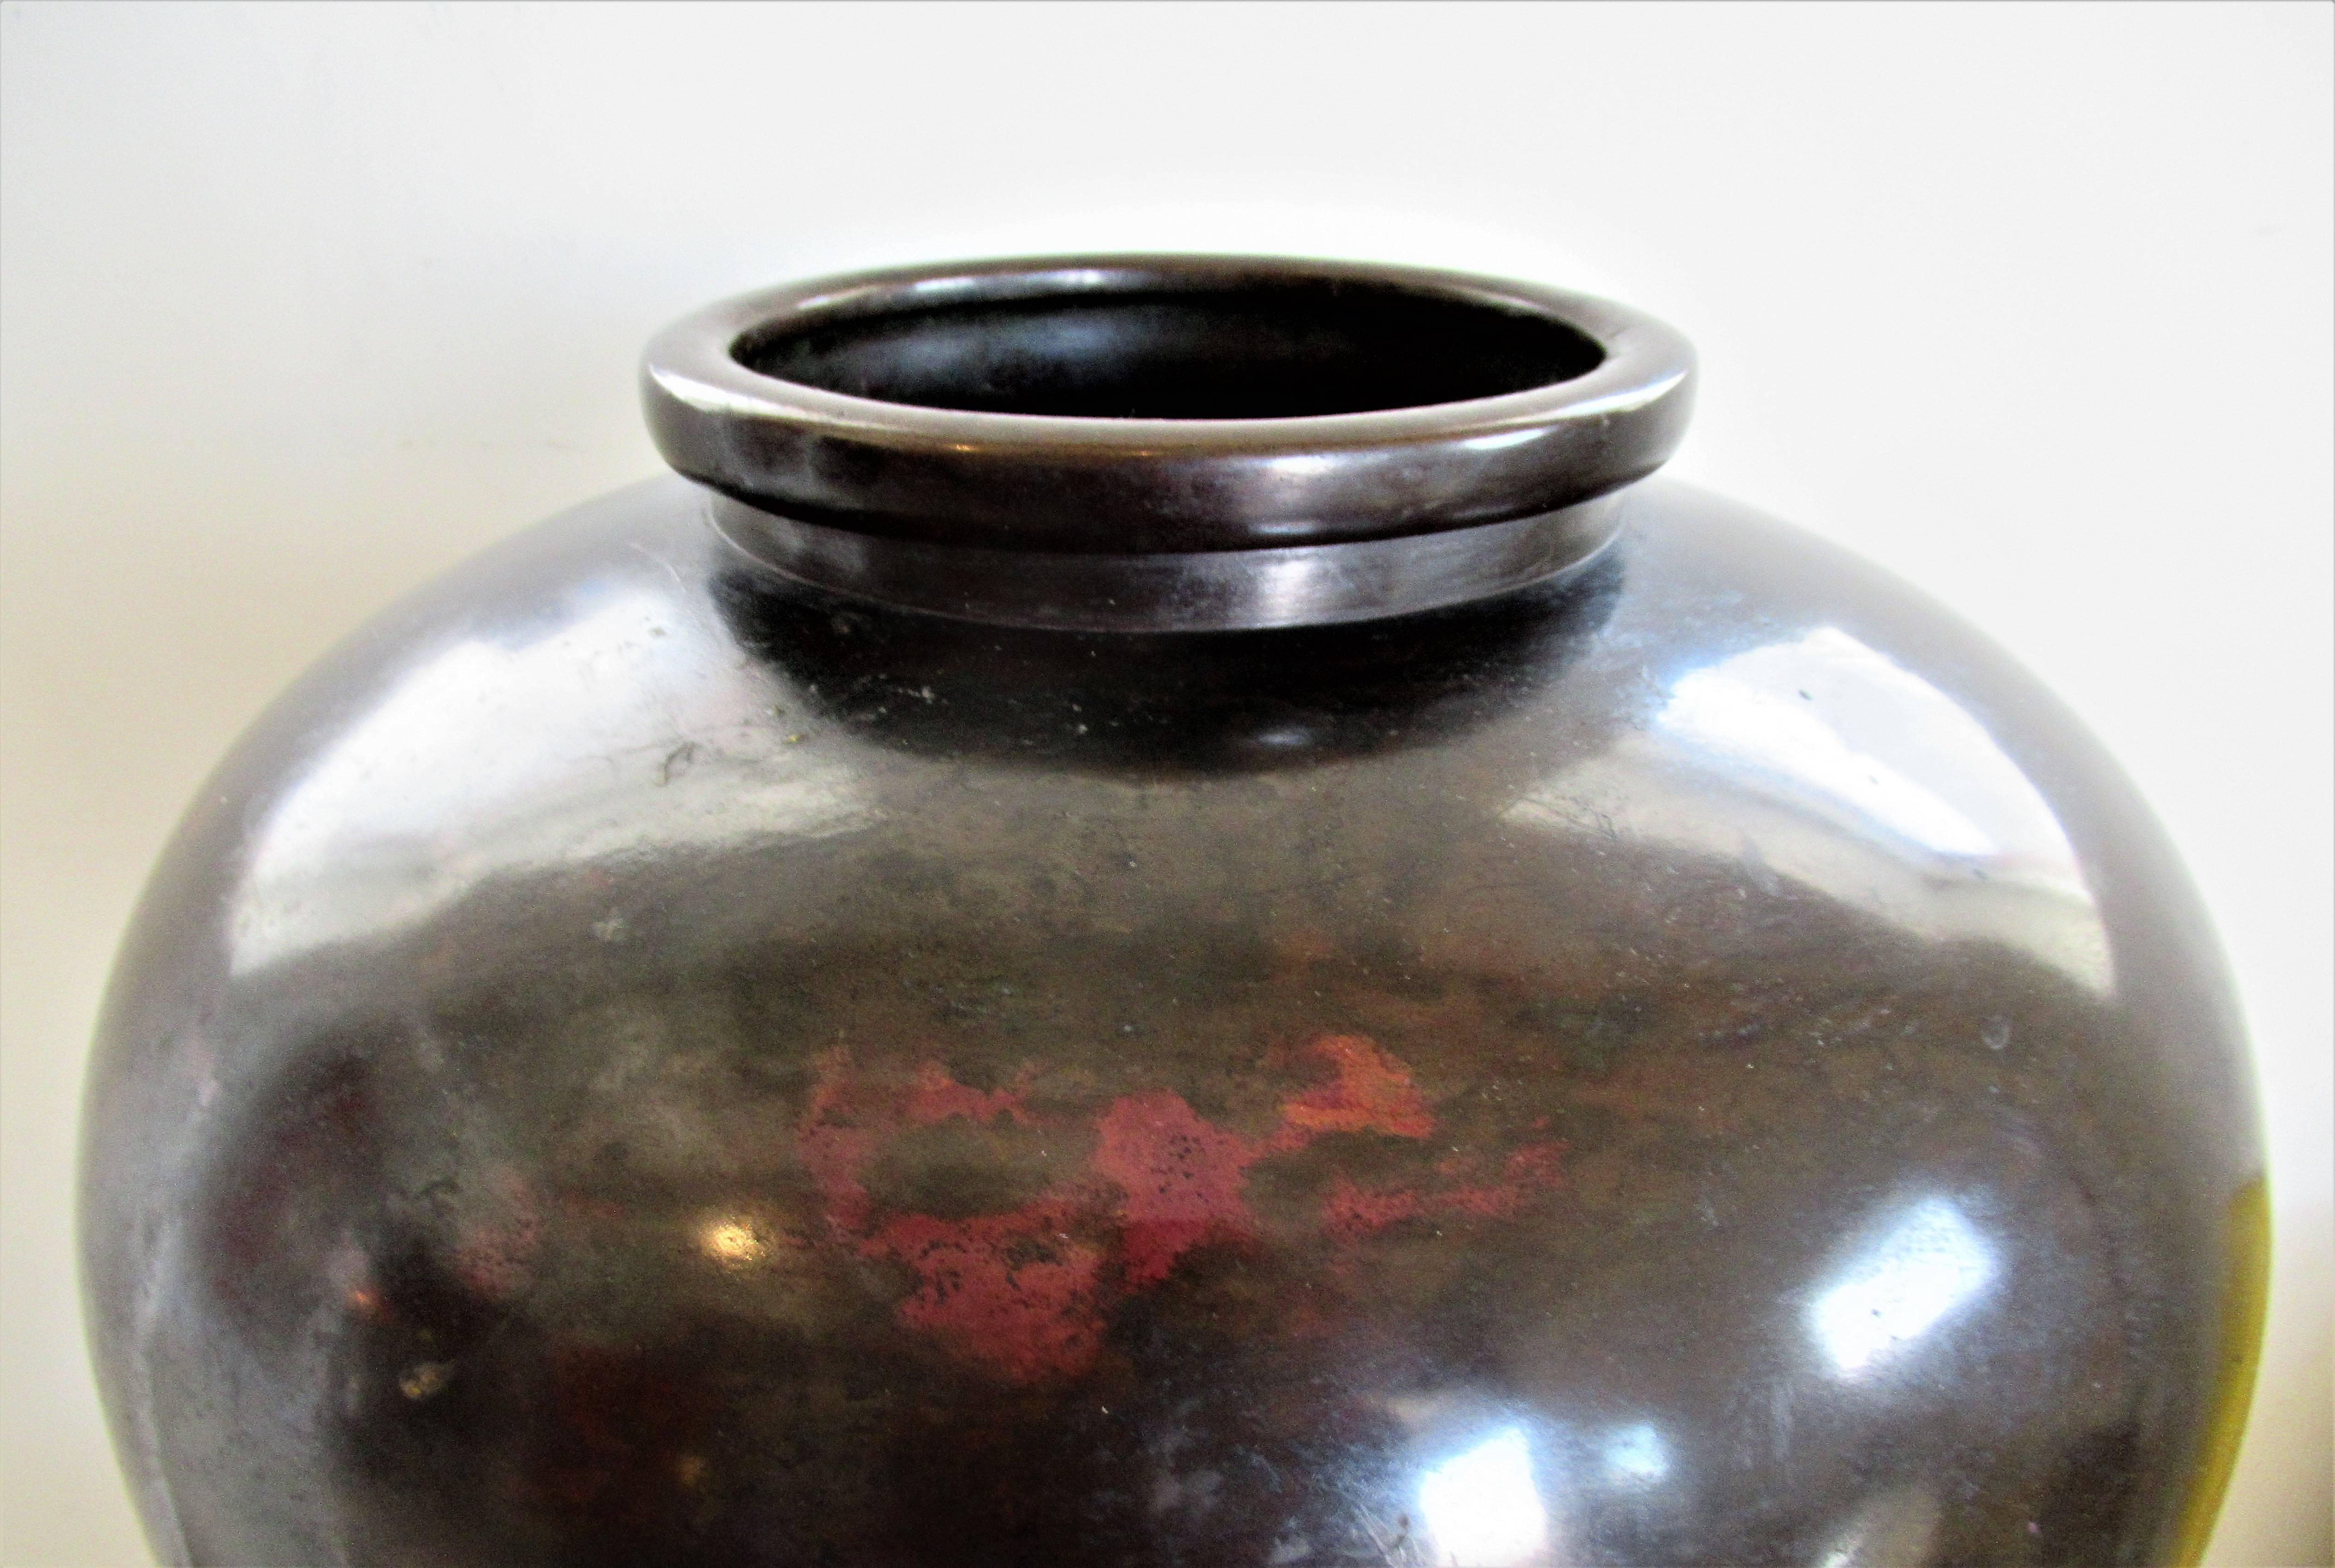 Large Japanese patinated bronze vessel with classical austere form and beautifully aged original color with rich mottling and red highlights to bronze metal. Very good quality. We think this is from the Showa period but could earlier. No apparent